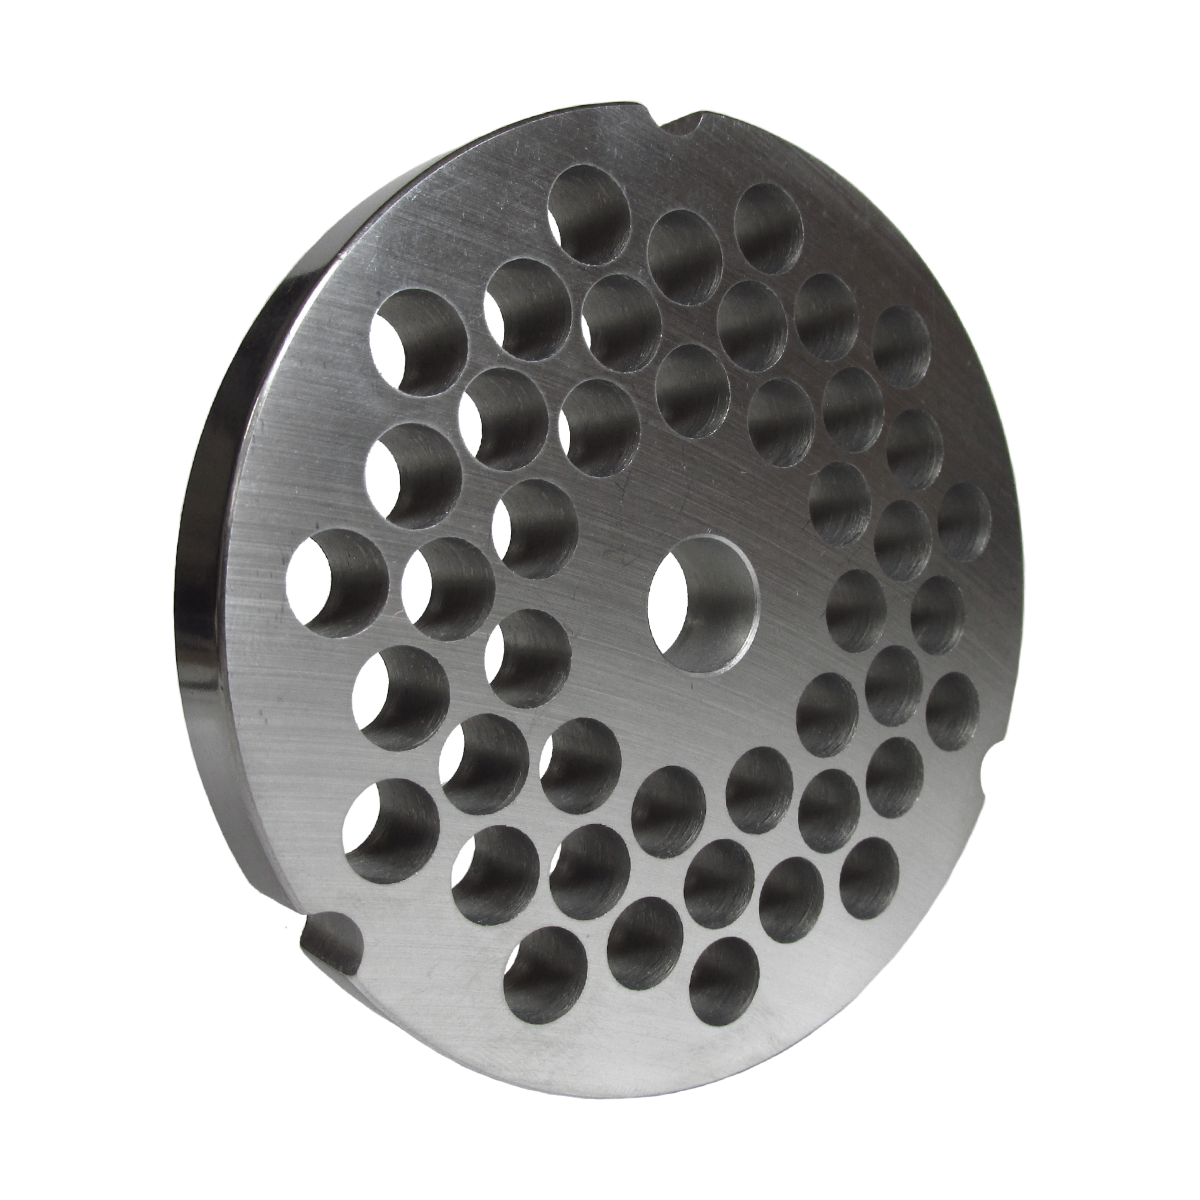 Grinder plate for #32 grinders with 3/4" hole, reversible